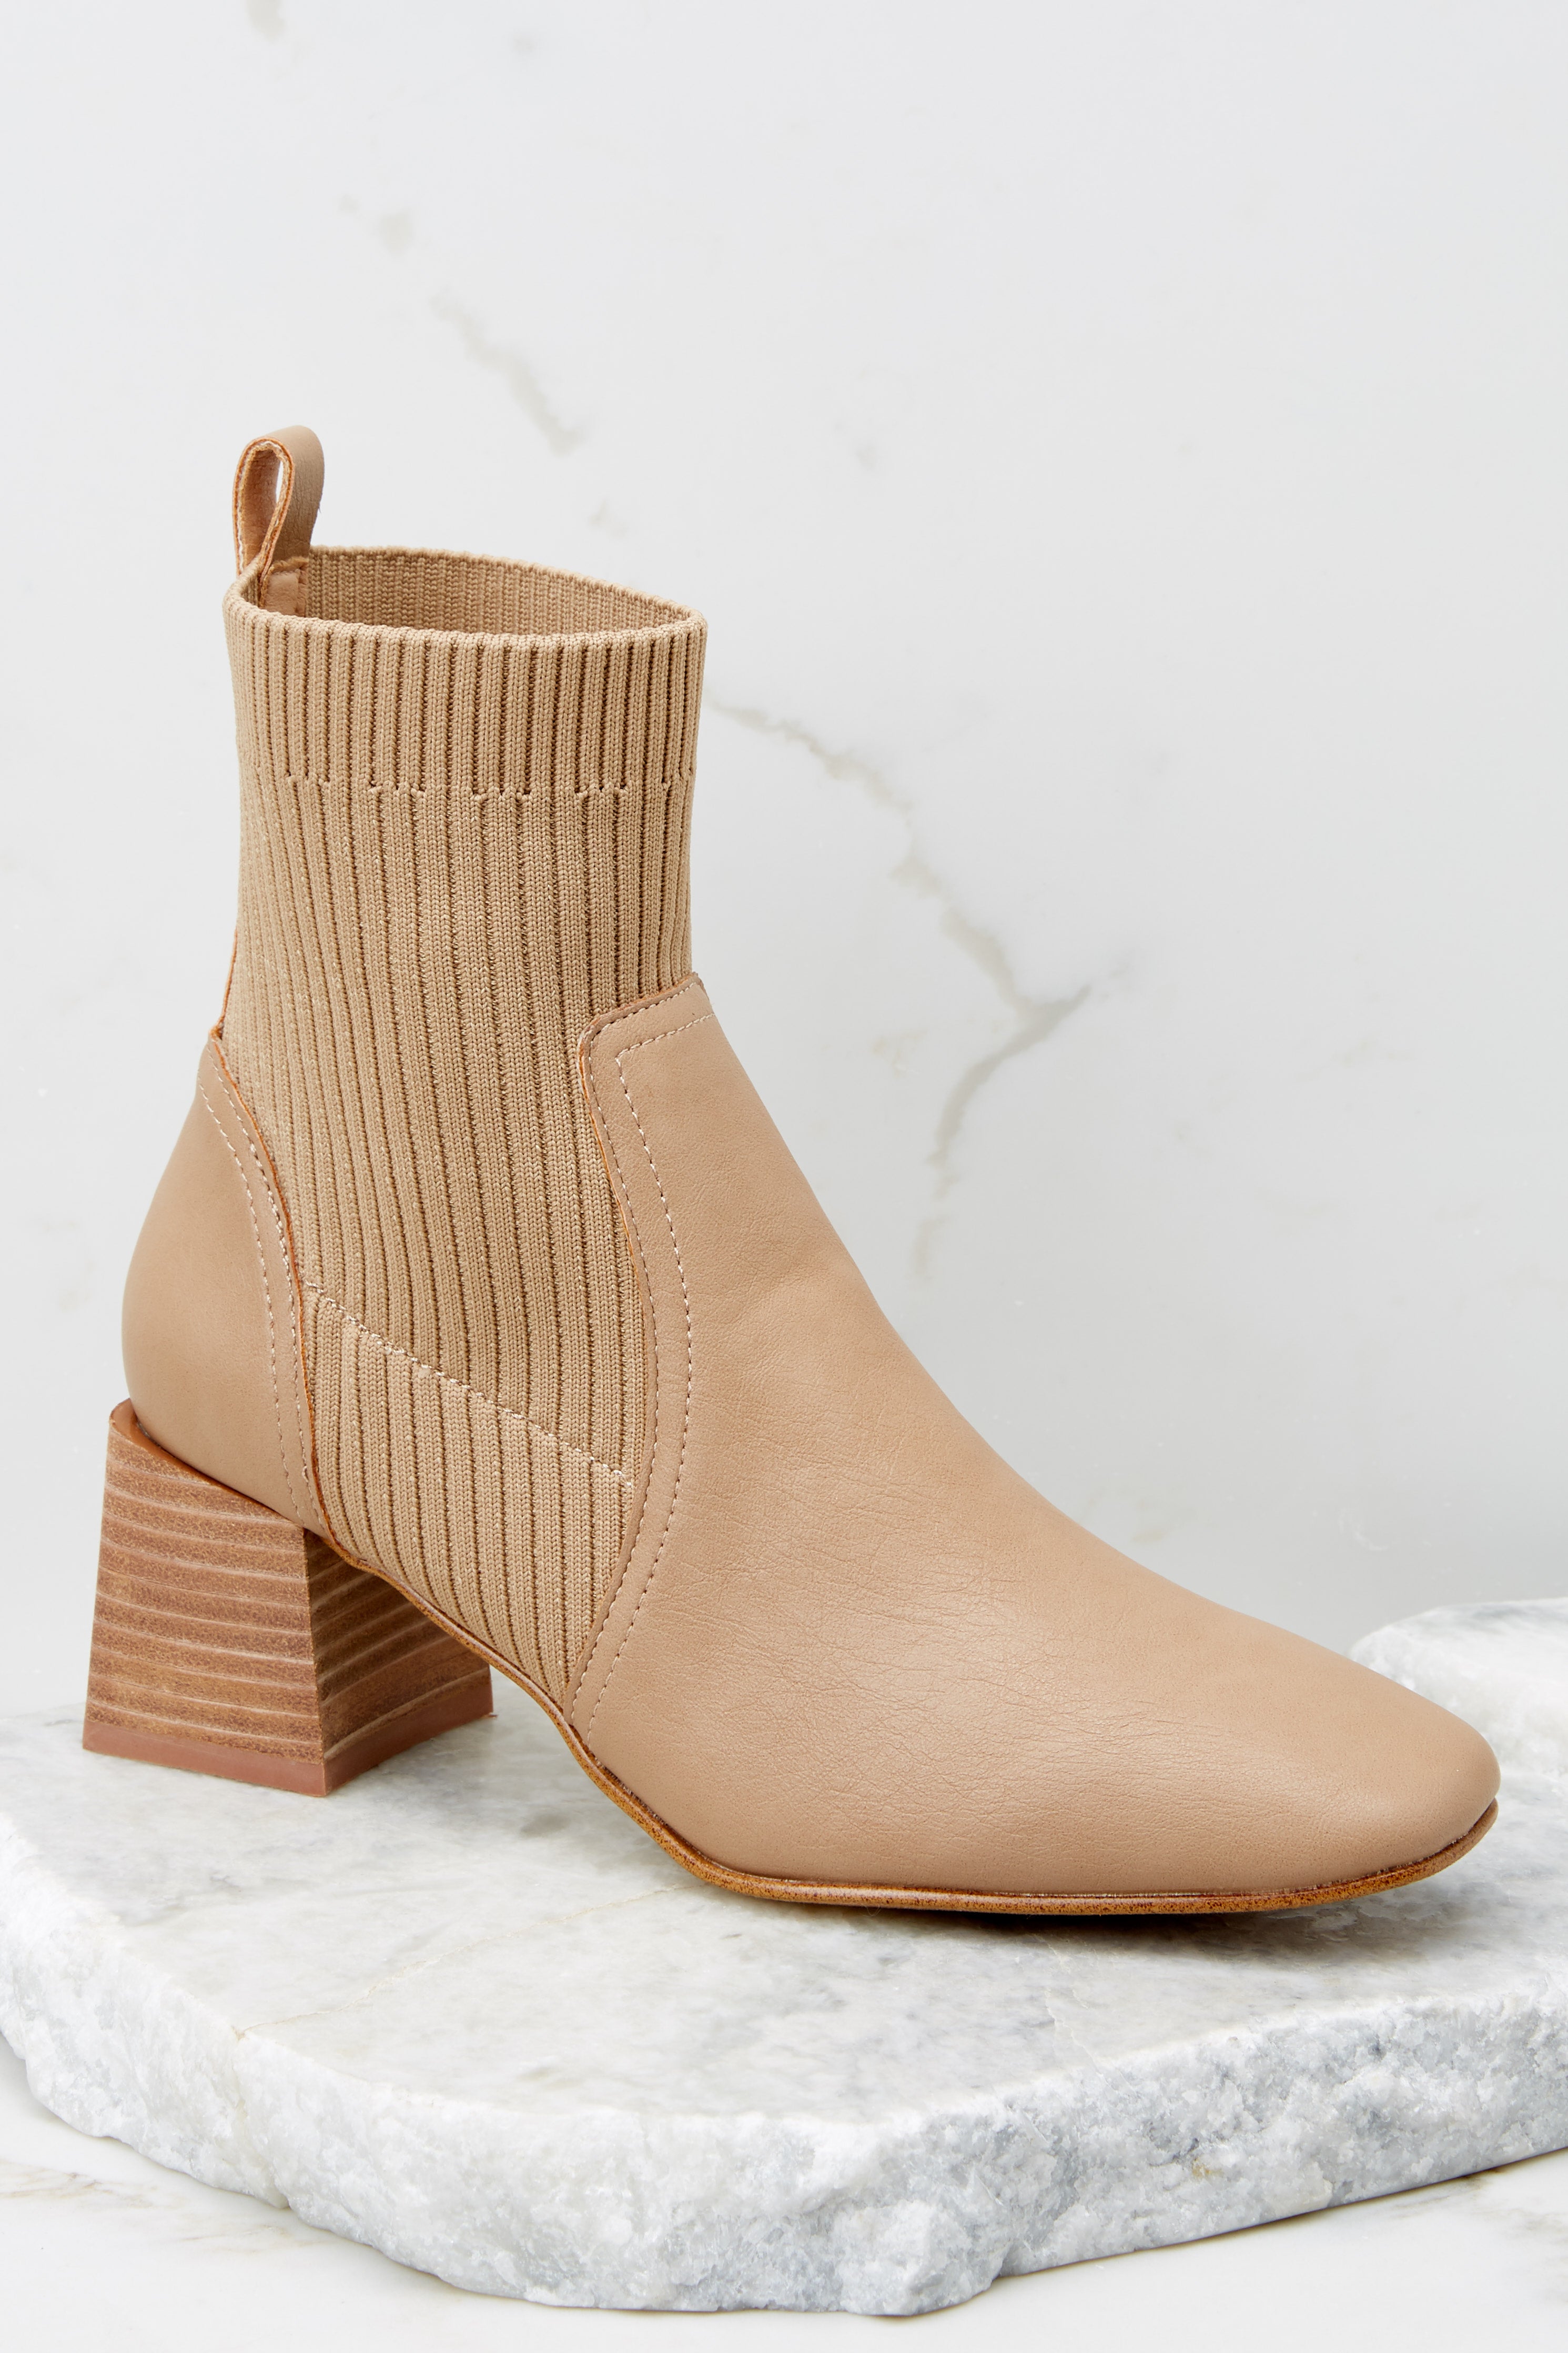 Seal The Deal Tan Ankle Booties